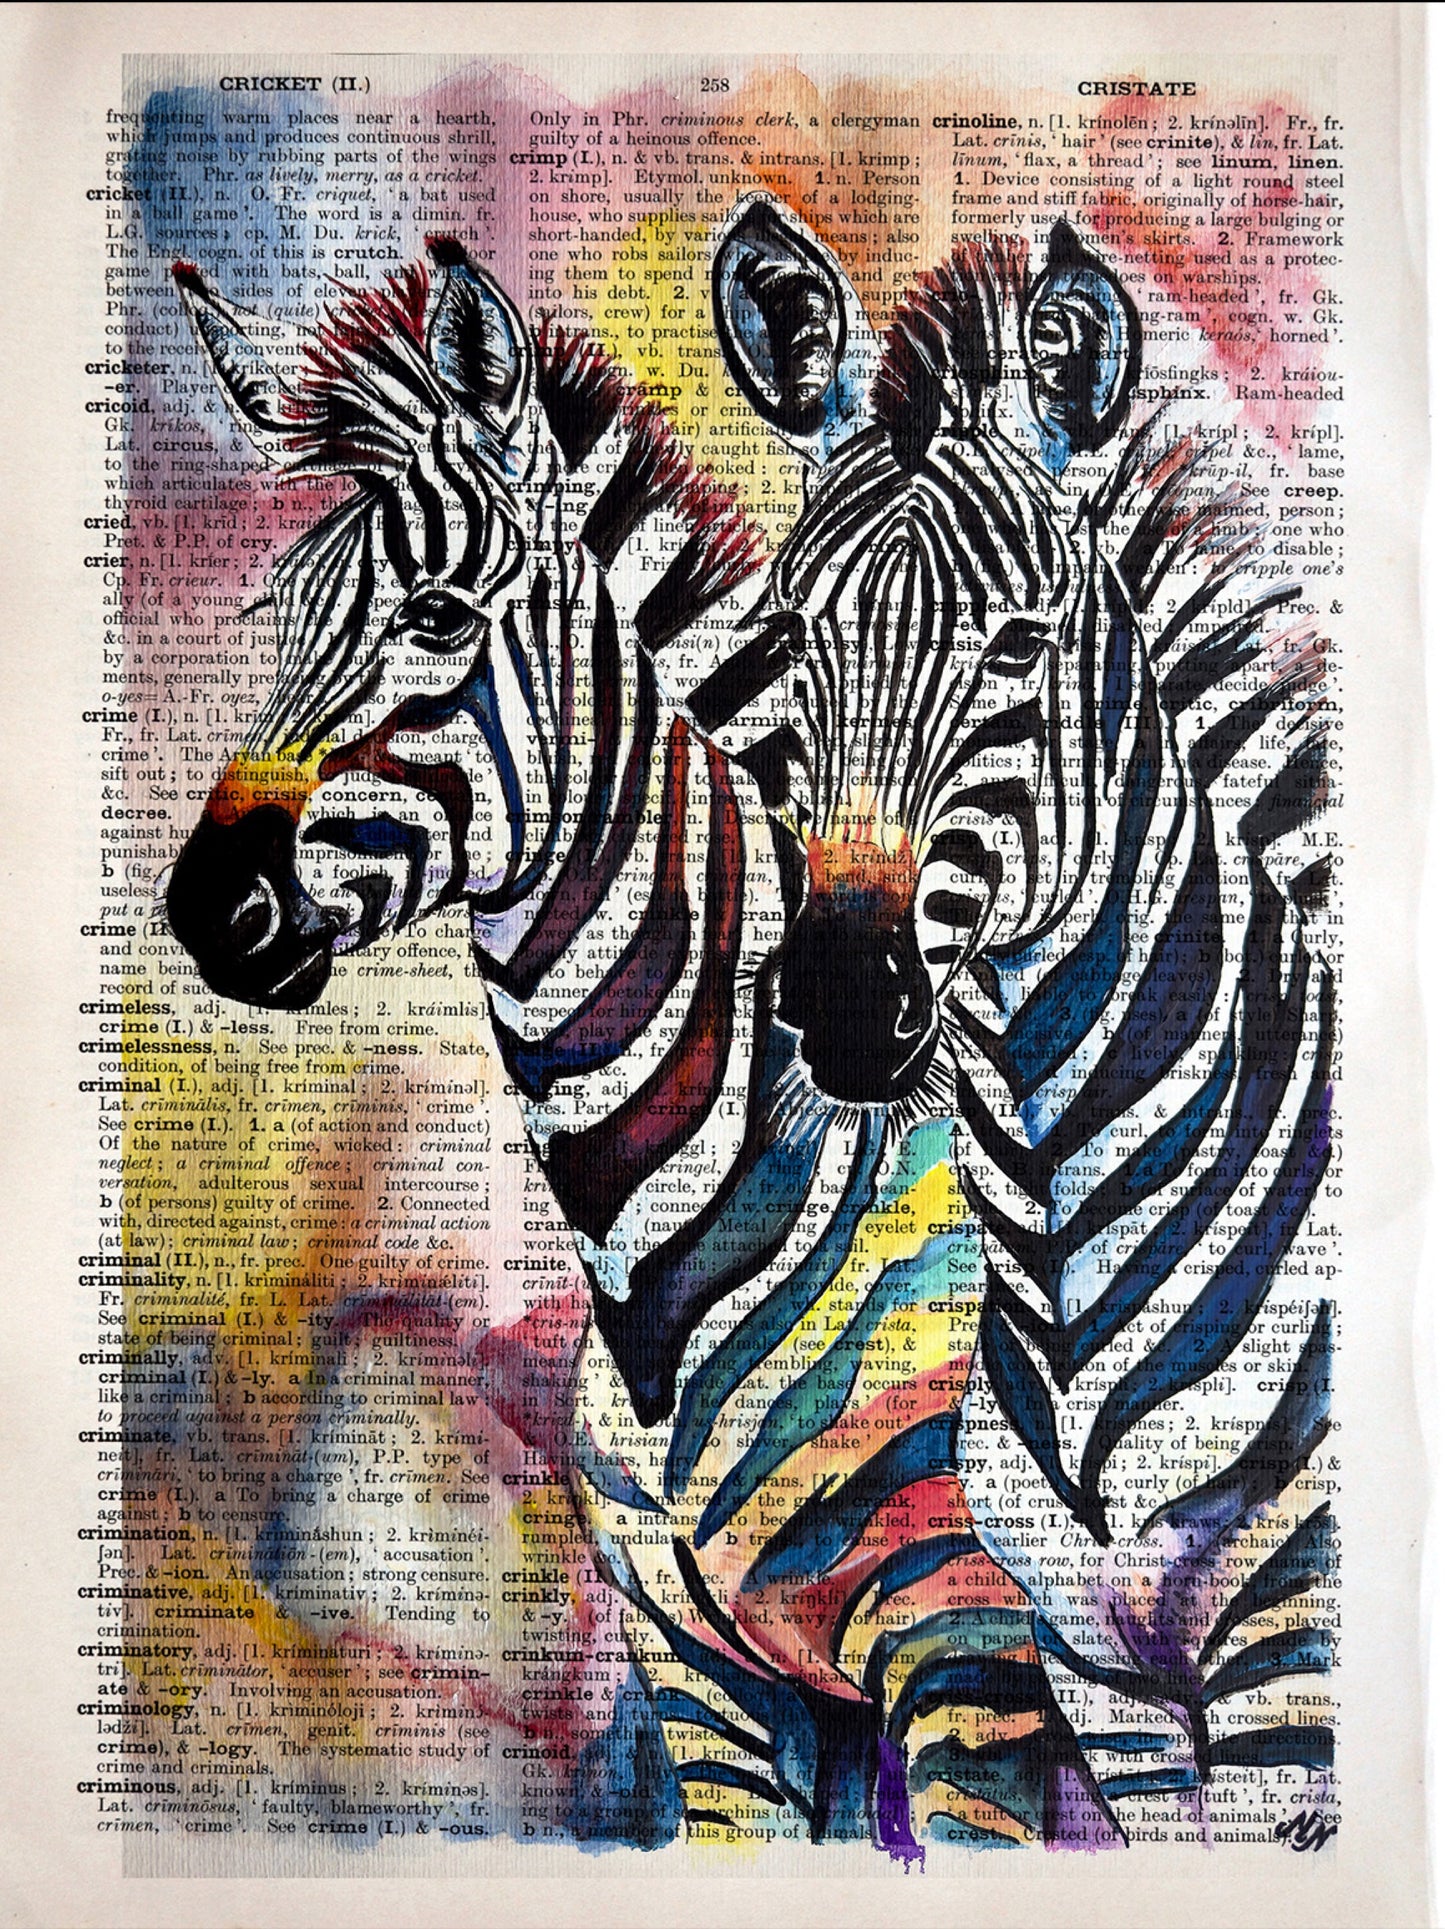 "Joyful Zebras" by Misty Lady, featuring playful zebras on a vintage dictionary page from 'The Universal Dictionary of the English Language.'